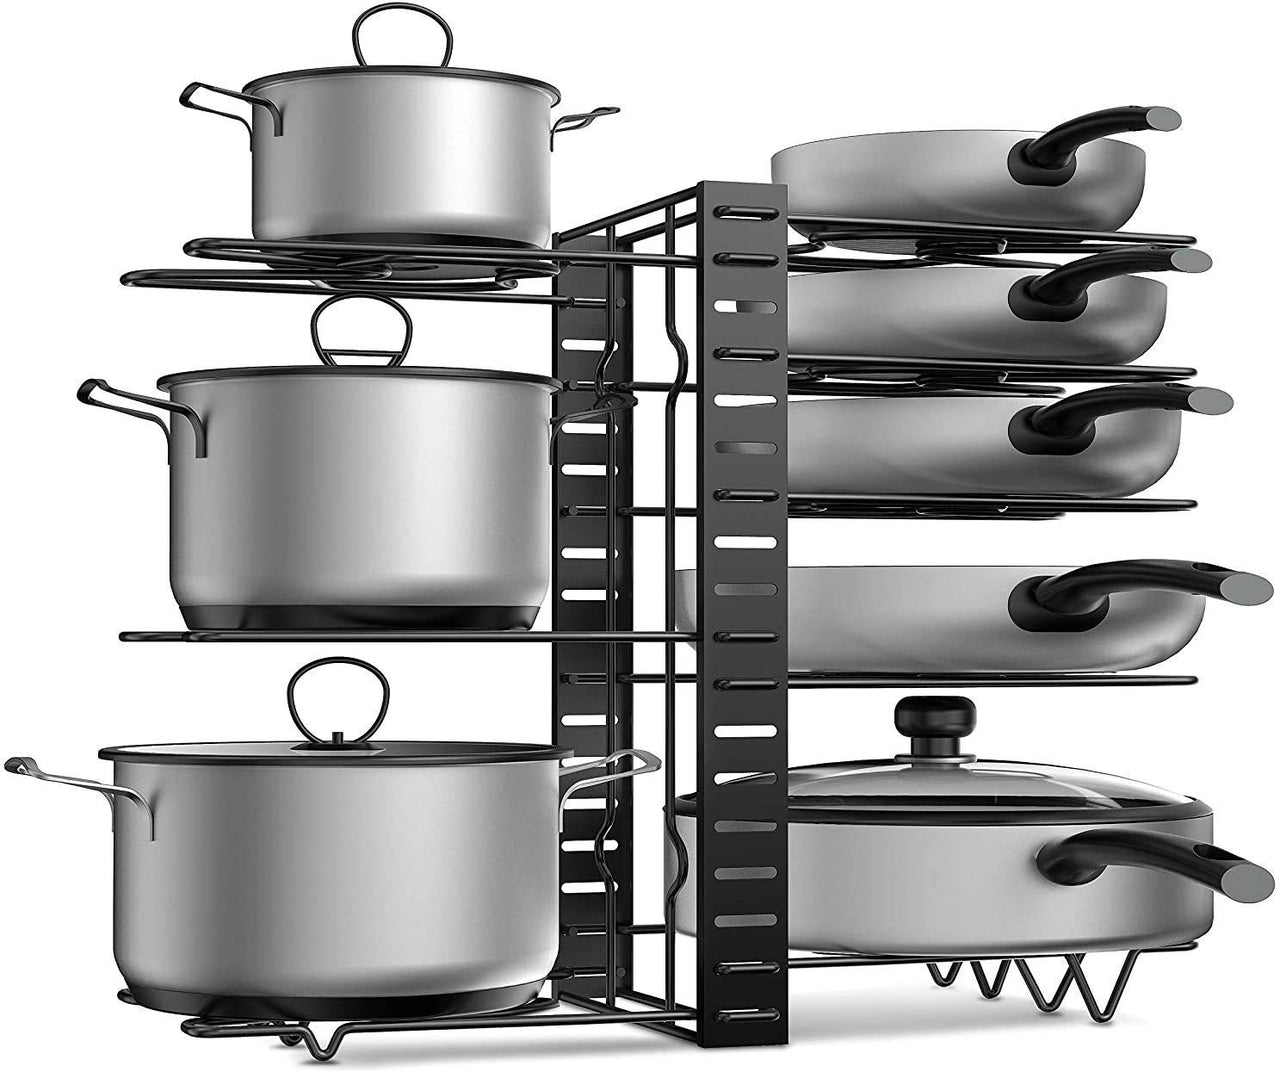 Pot Rack Organizer Kitchen Organizer, 8 & 5 Tiers Adjustable Pots And Pans Organizer, Large Pot Lid Holders Pan Rack For Kitchen Cabinet Counter Dime Store